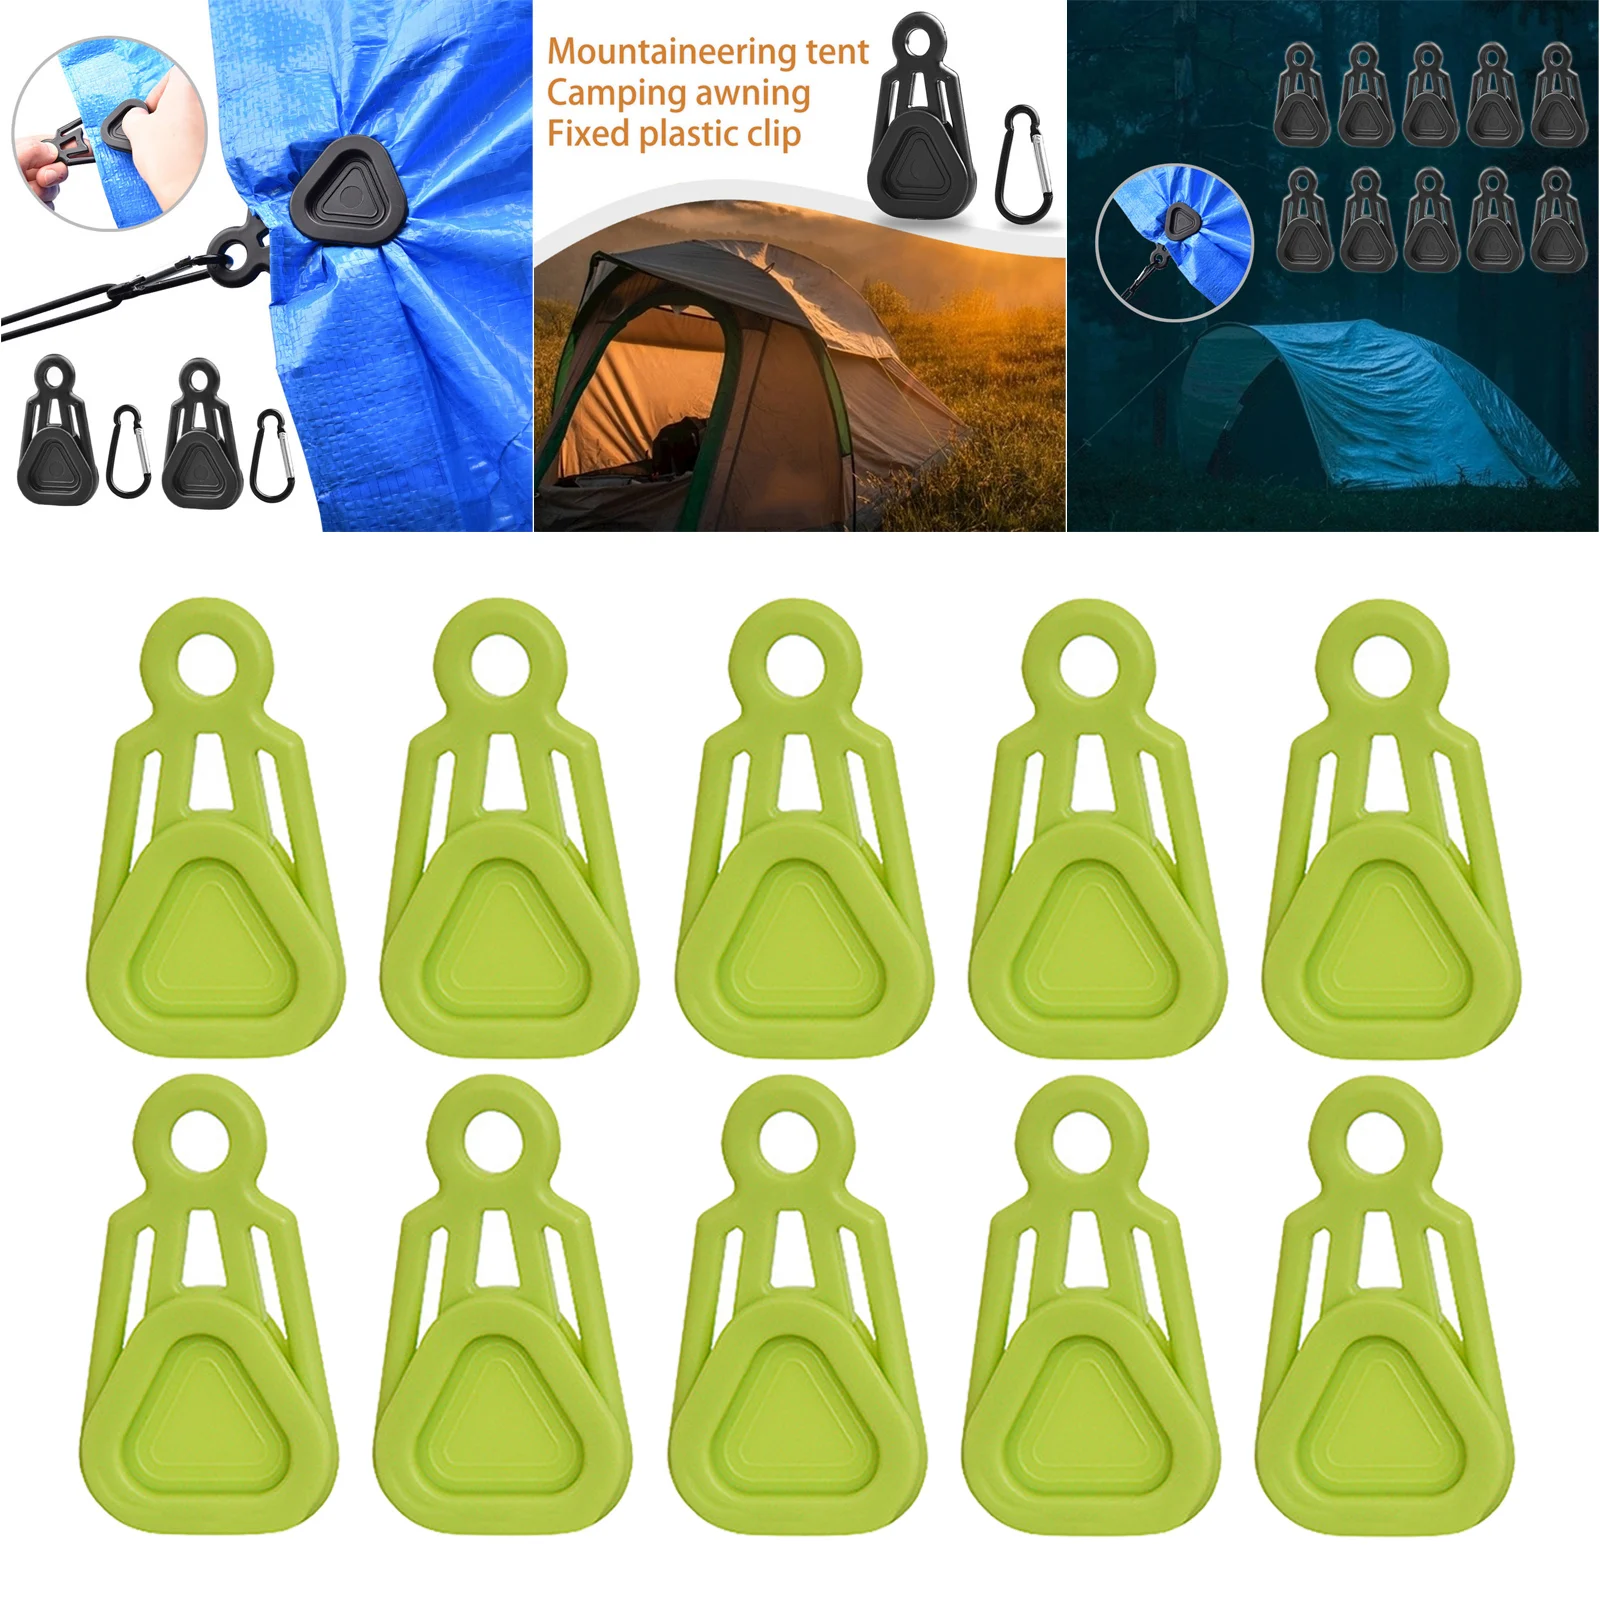 10x Heavy Duty Tarp Clips, Secures Tarps Tents Awnings Canopies Covers Outdoors